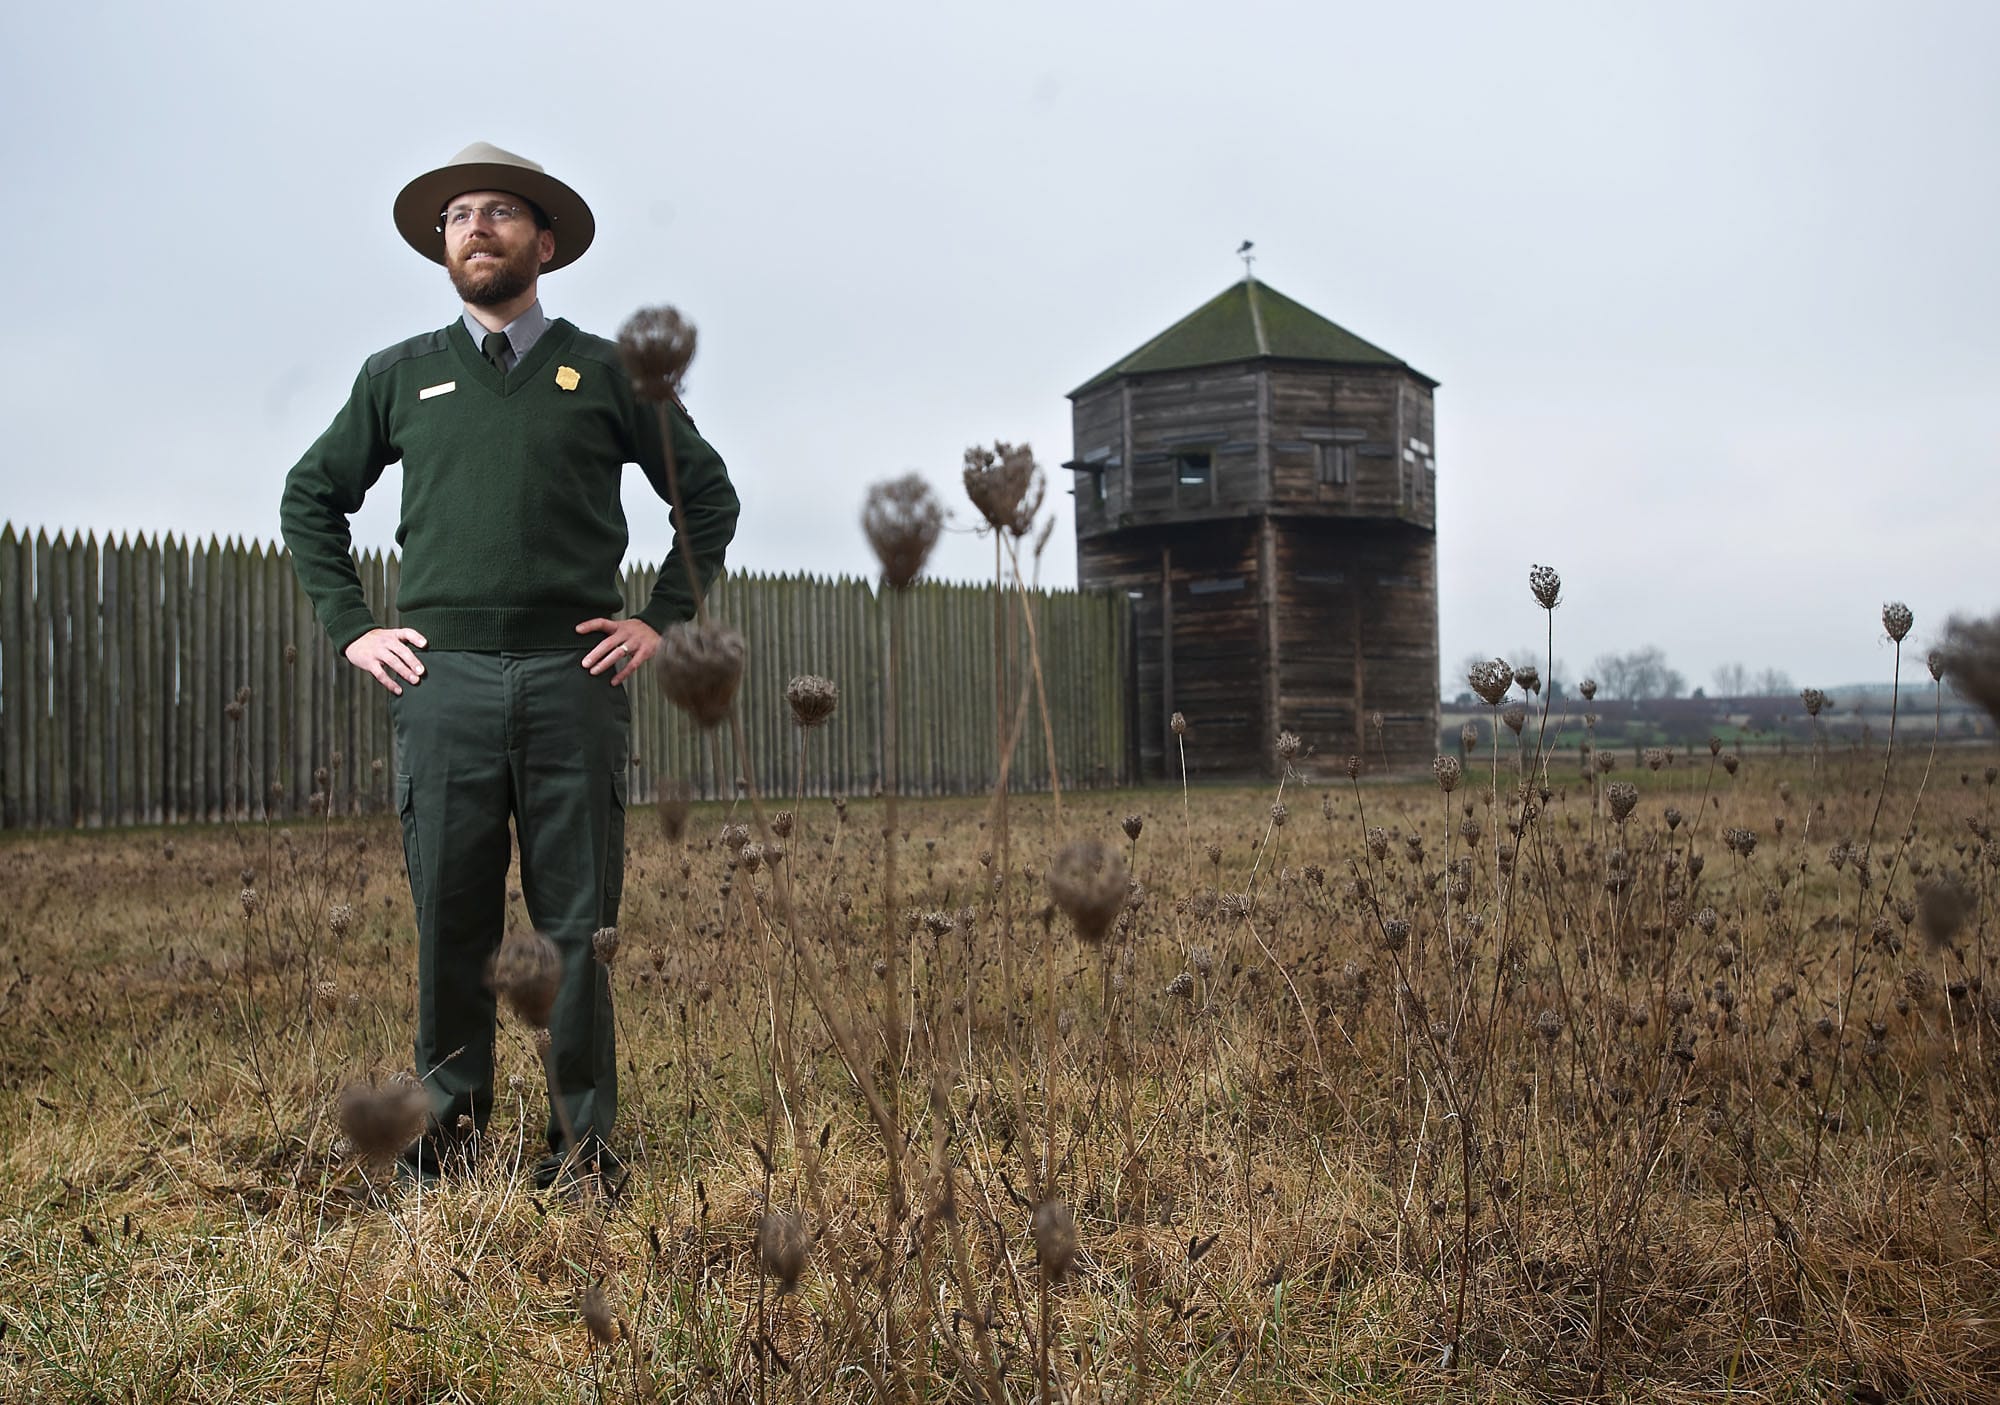 Historian and Chief Ranger Greg Shine says that Fort Vancouver was a proving ground for people sent to the remote outpost by the Hudson's Bay Company and the U.S.